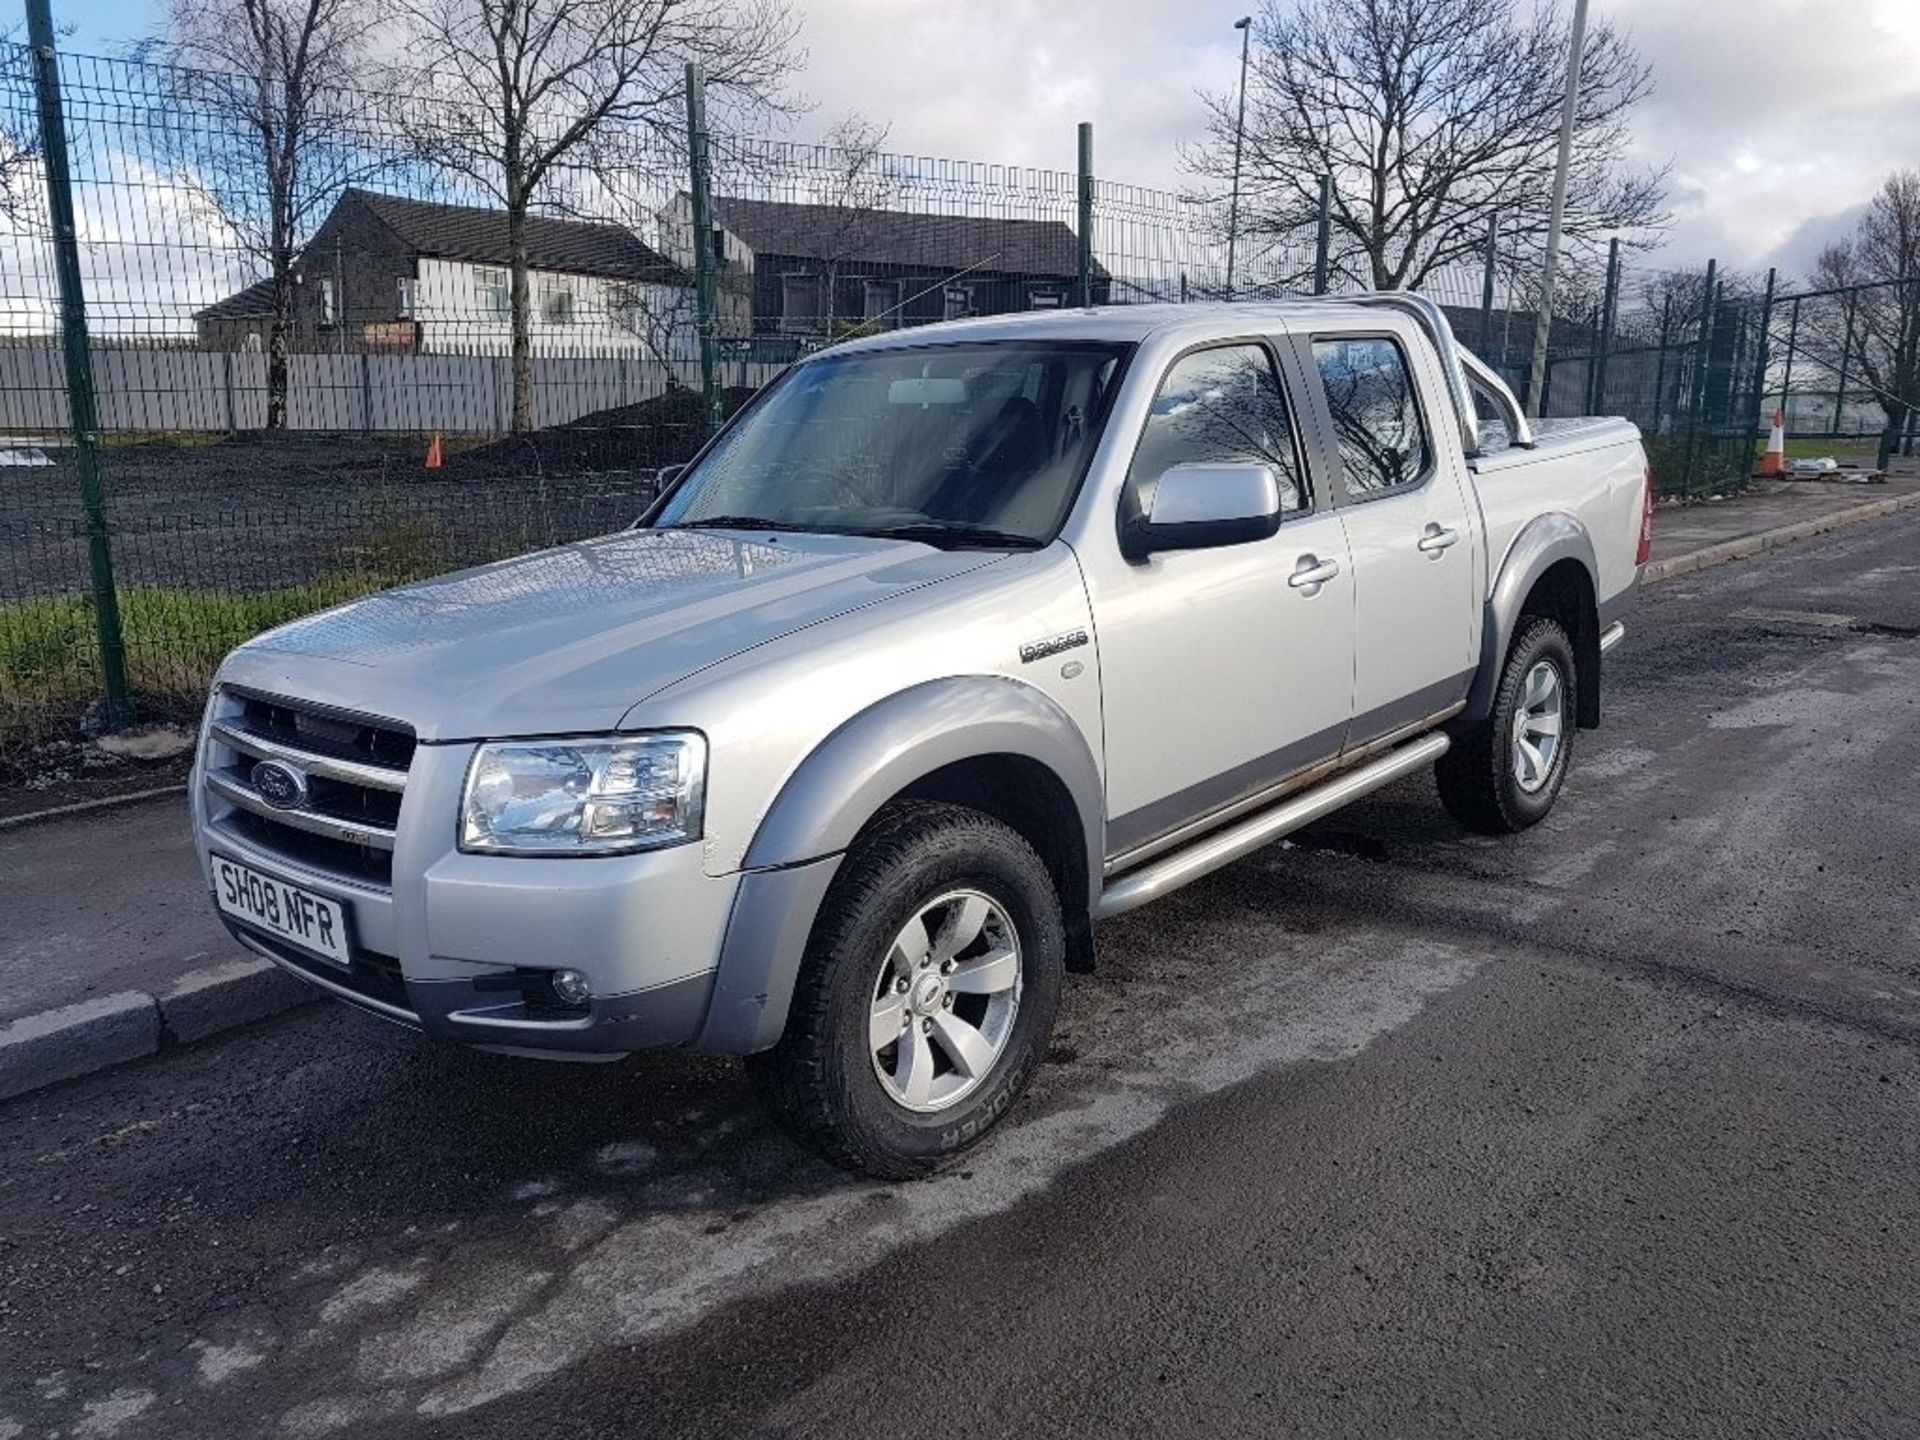 FORD 4X4, RANGER 2.5 TDCI XLT DOUBLE CAB, SH08 NFR, FIRST DATE OF REGISTRATION 30/05/2008, 2.5 - Image 4 of 15